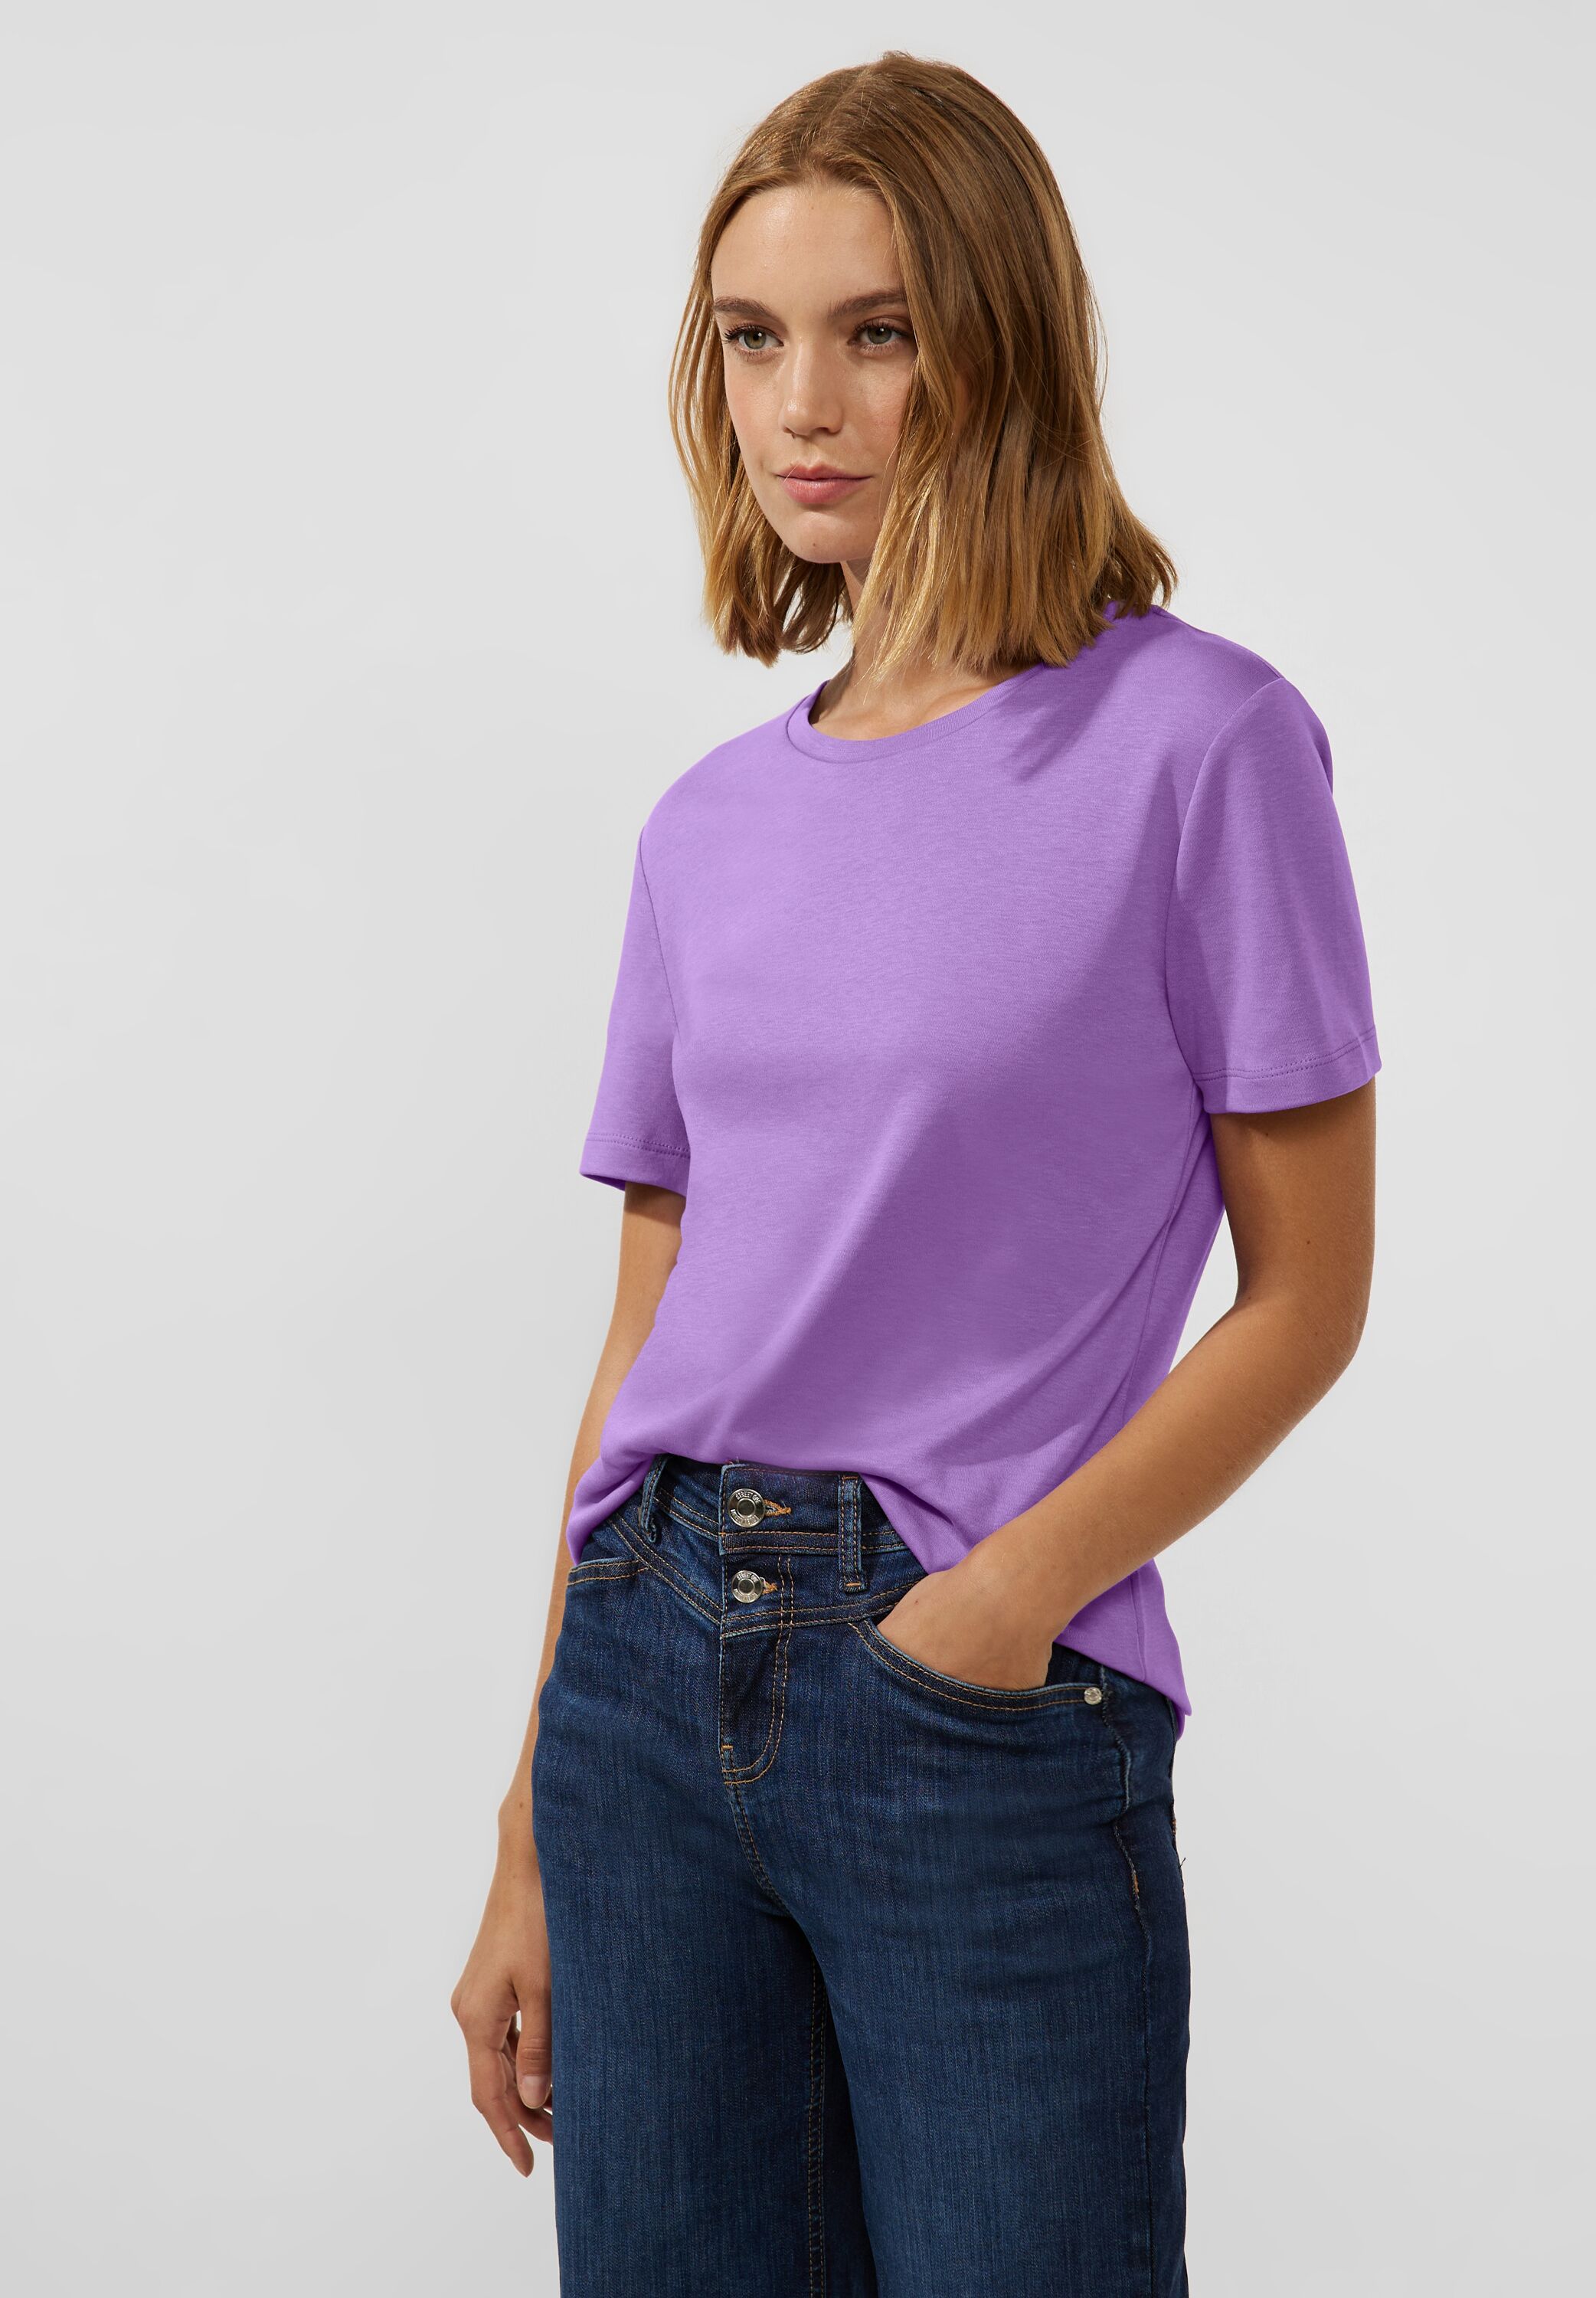 reduziert in T-Shirt SALE Lupine - CONCEPT im One Lilac A320321-15181 Mode Street